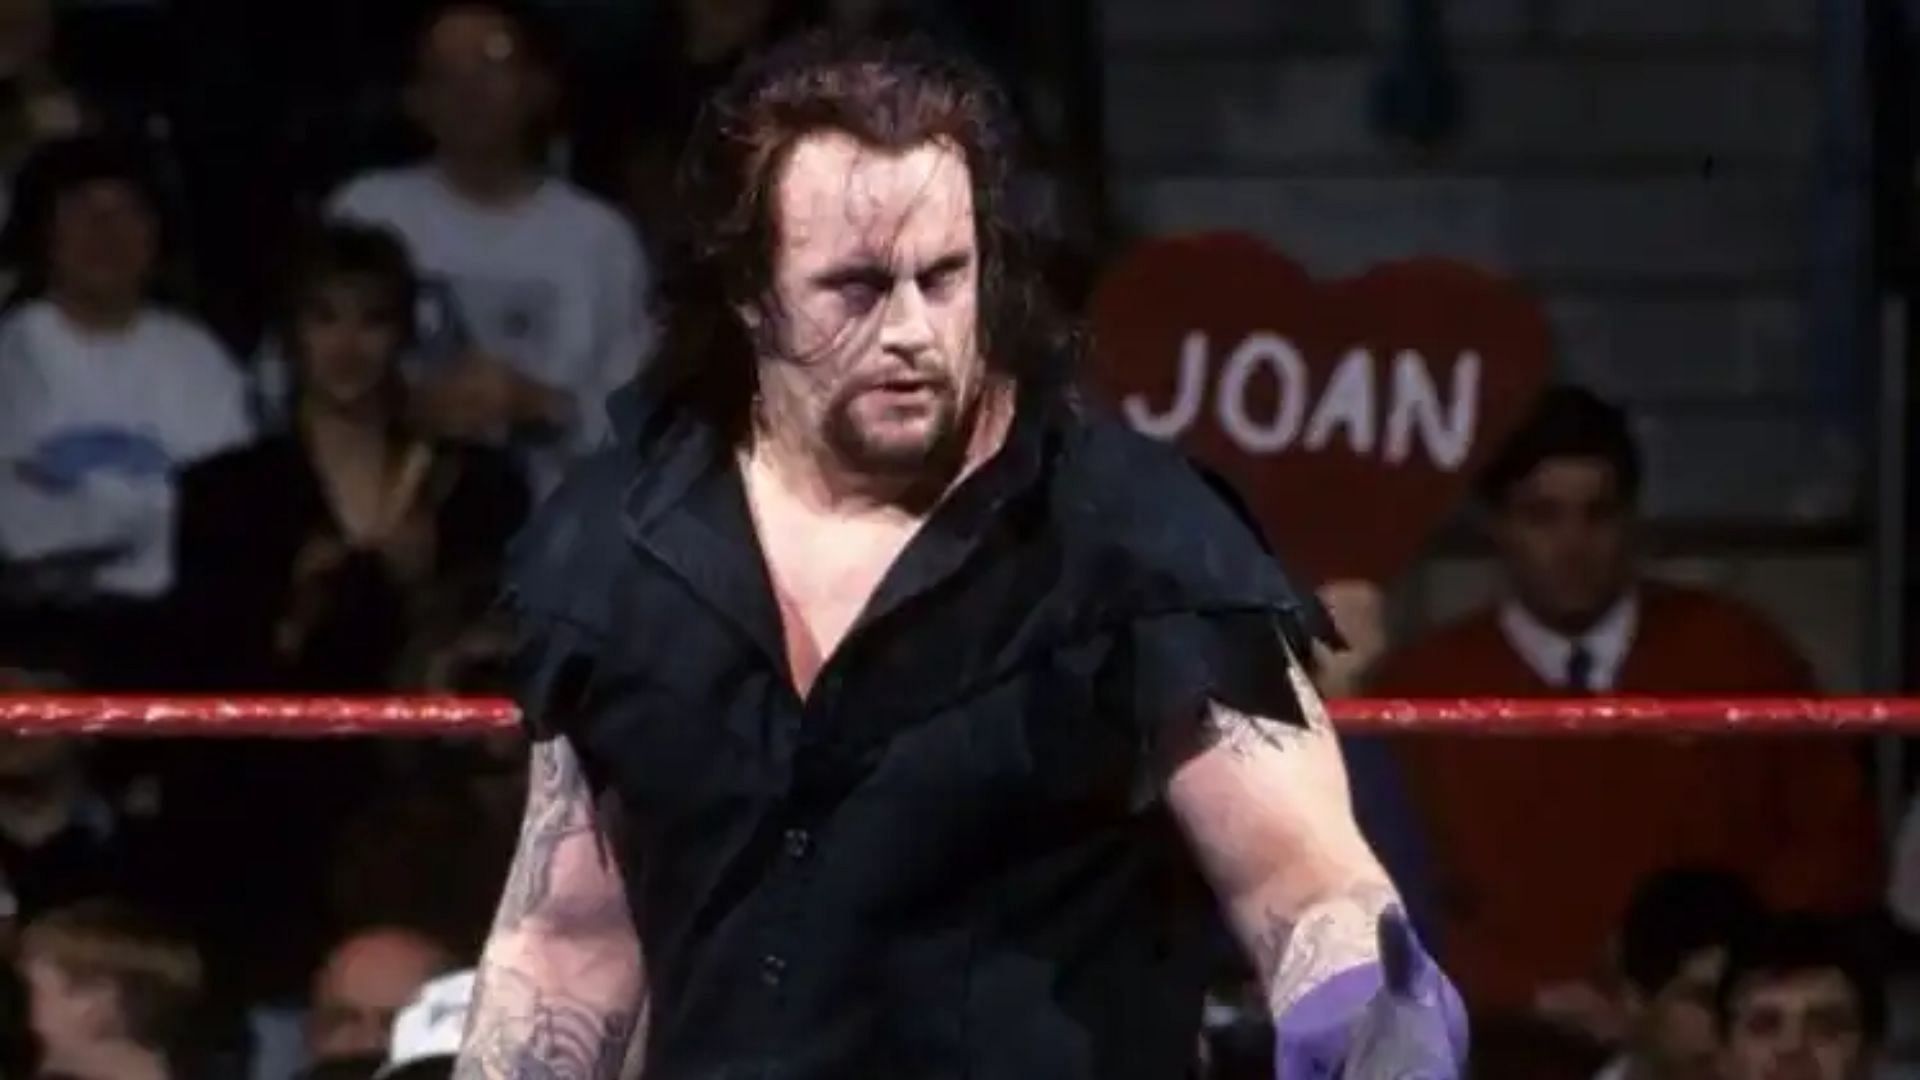 The Undertaker is one of WWE